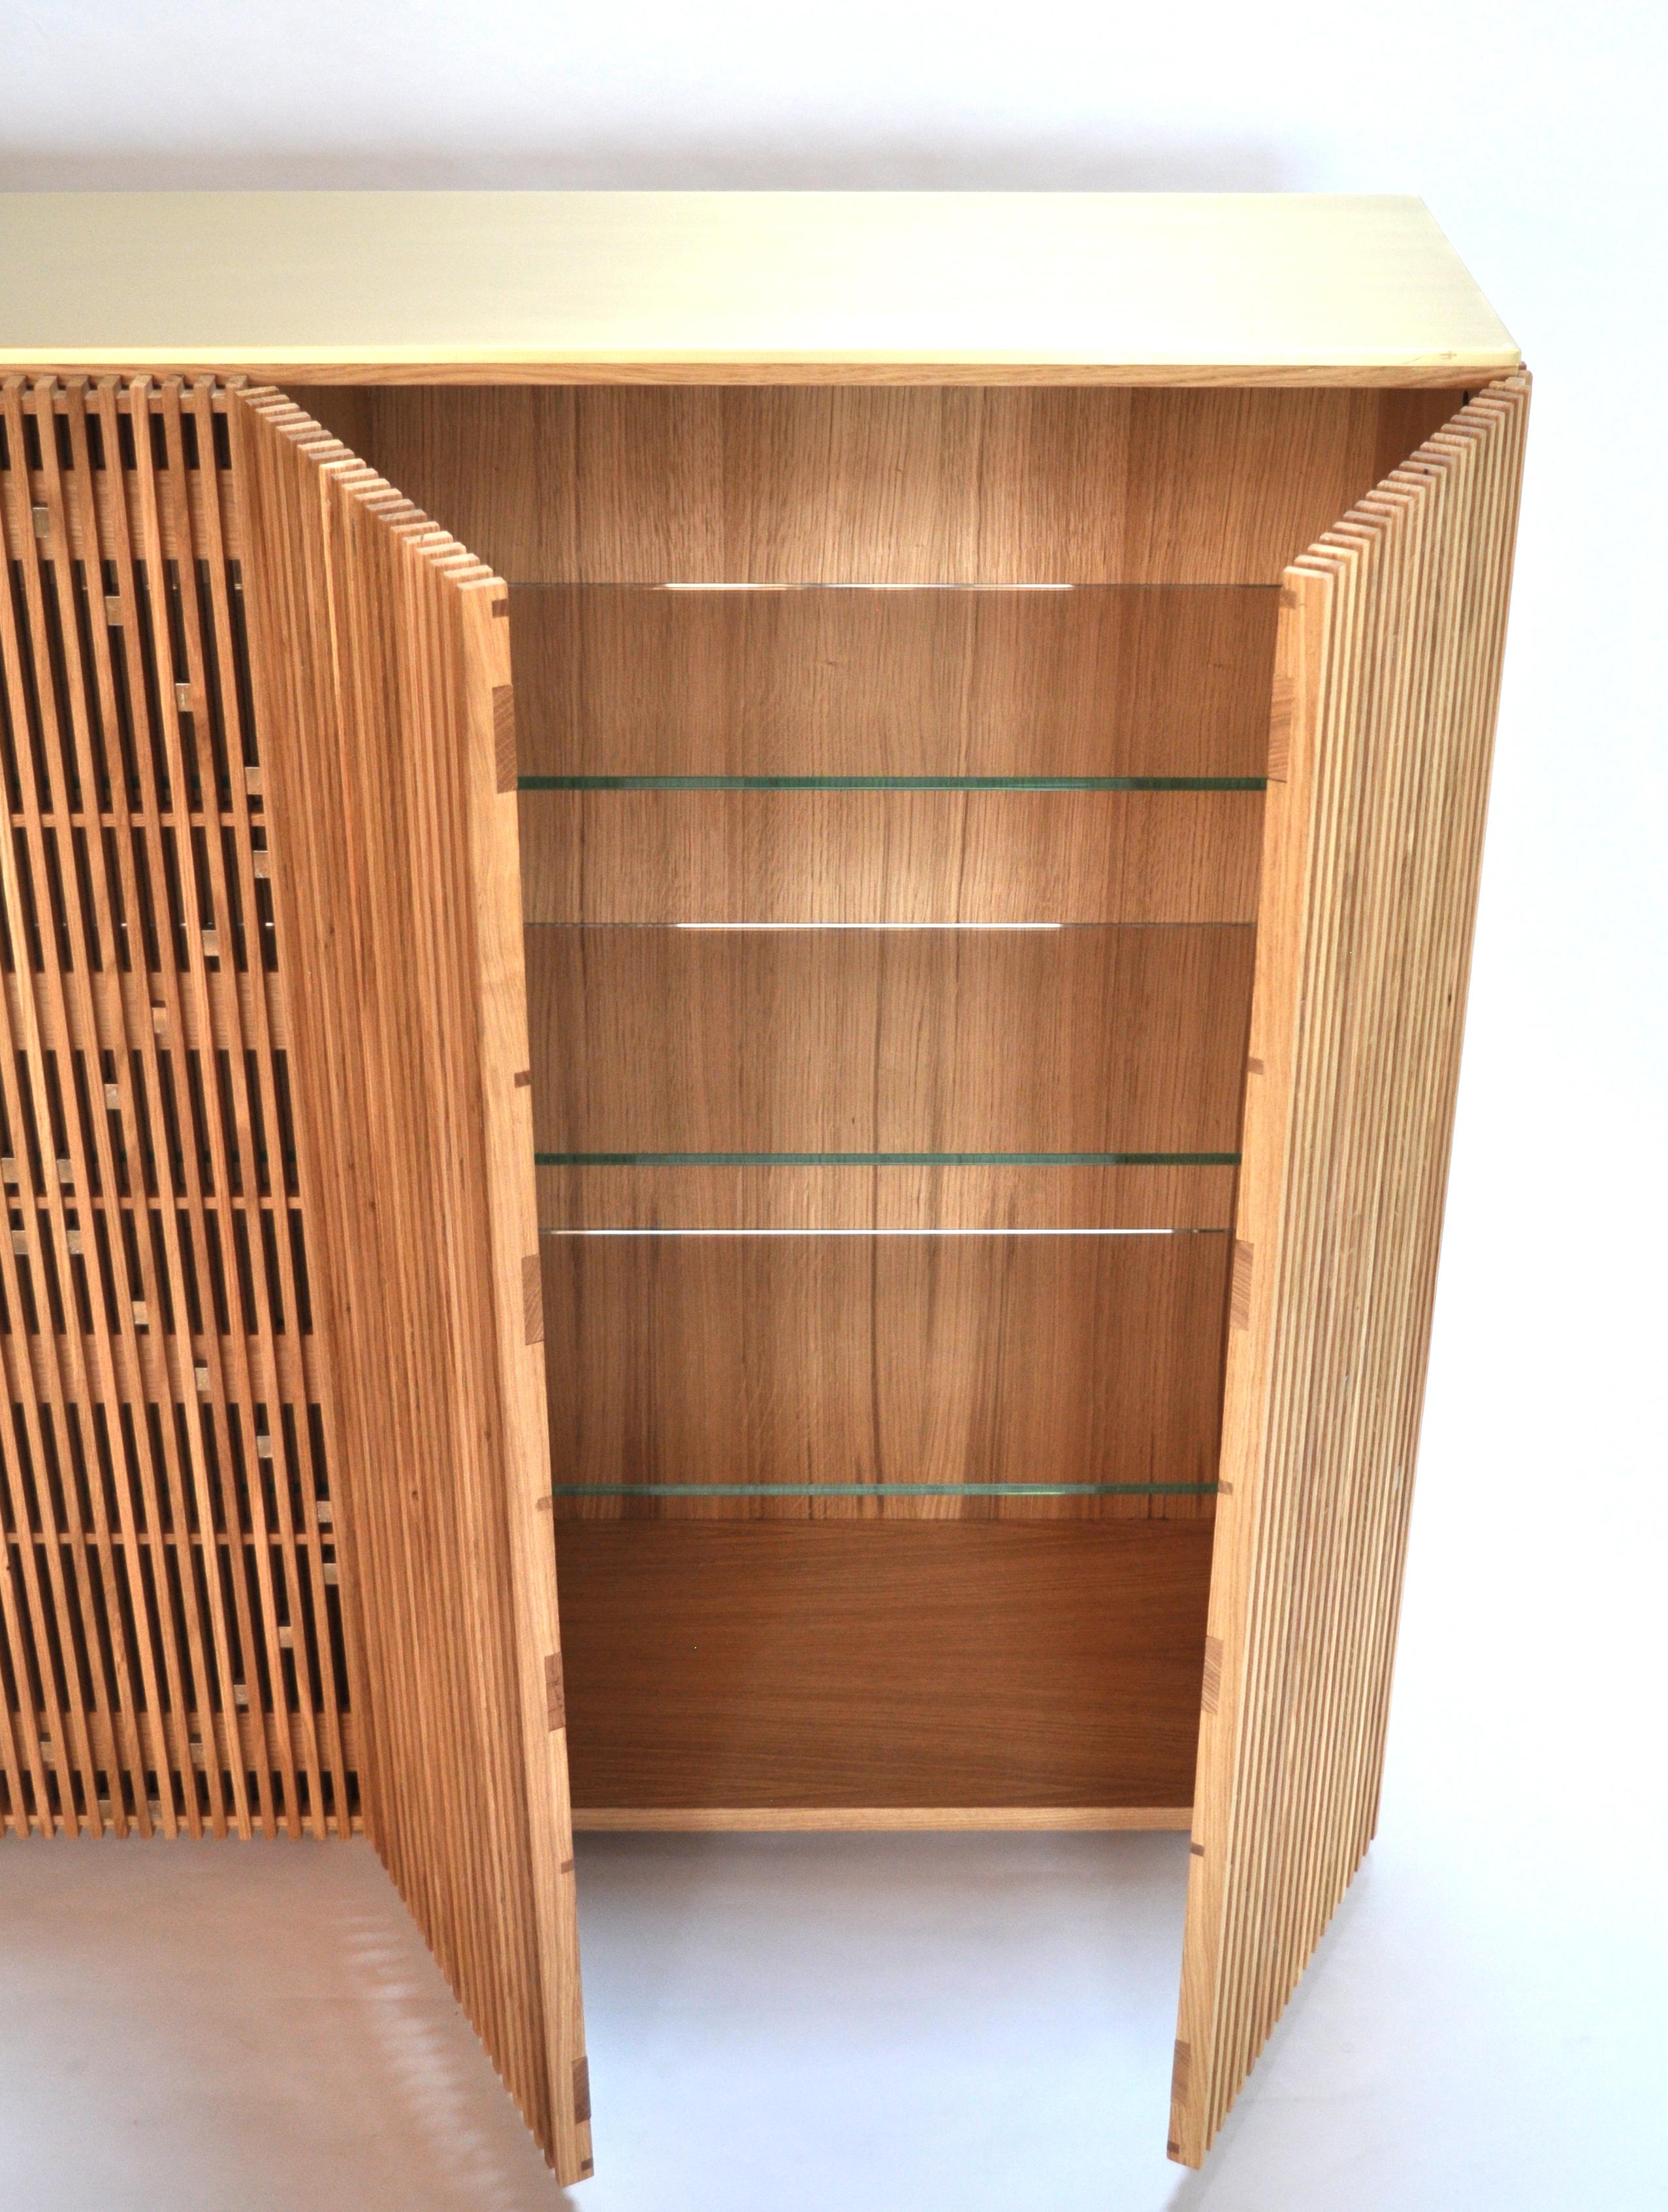 Brushed Cabinet Milione by Debonademeo for Medulum, Oakwood and Brass, Covered in Brass For Sale